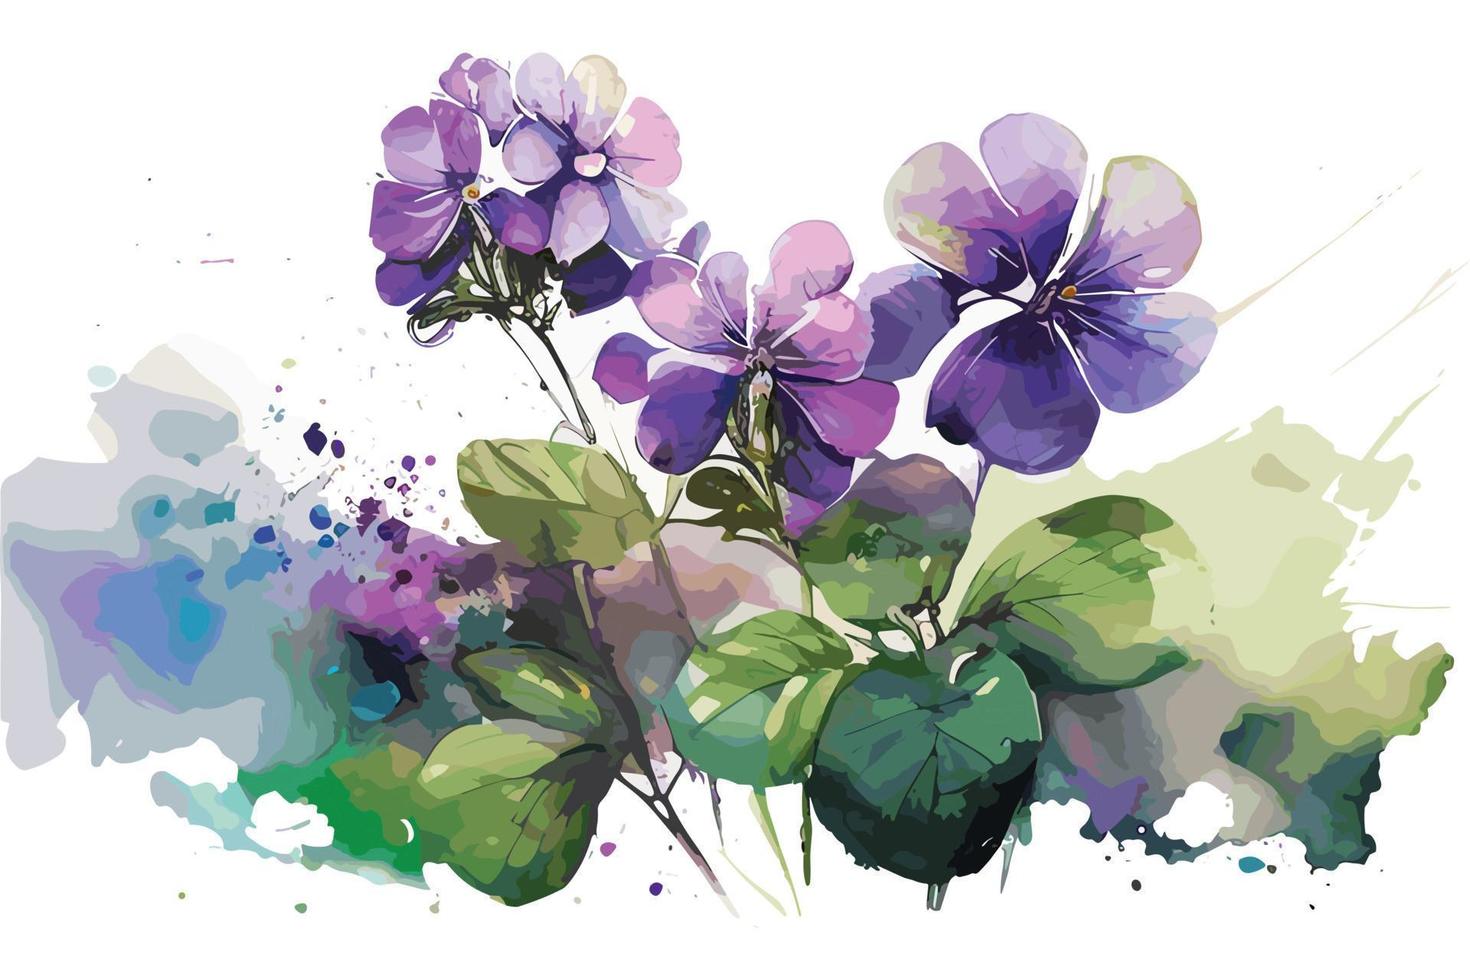 watercolor vibrant violets flower illustration for social media ads, posters, banners, and book covers design vector